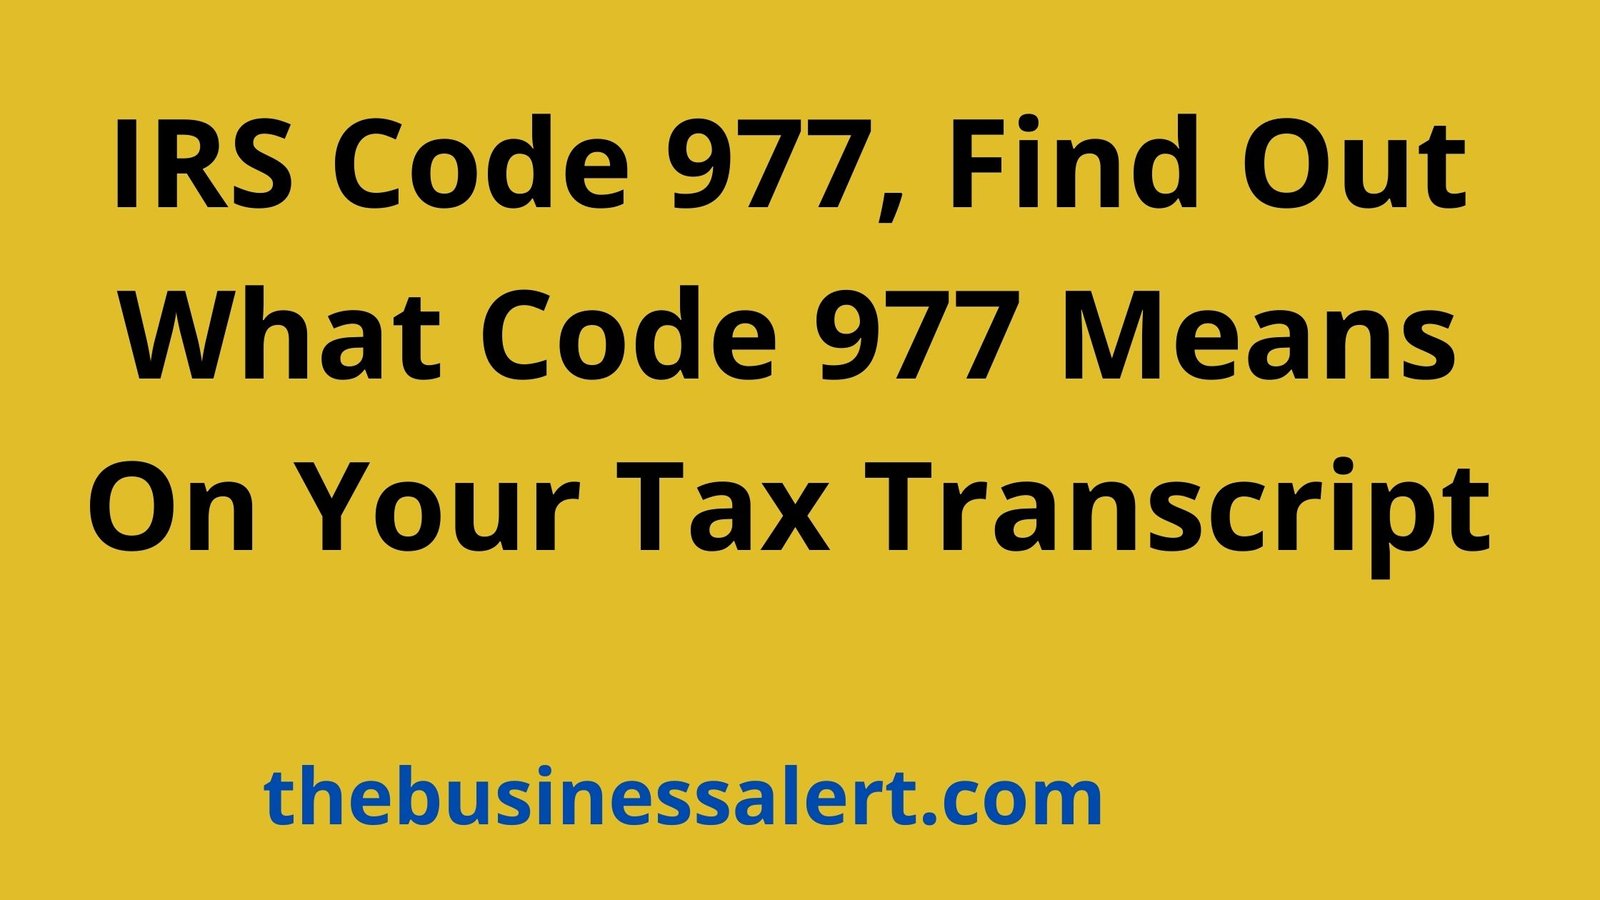 IRS Code 977, What Code 977 Means On Tax Transcript 2022/2023